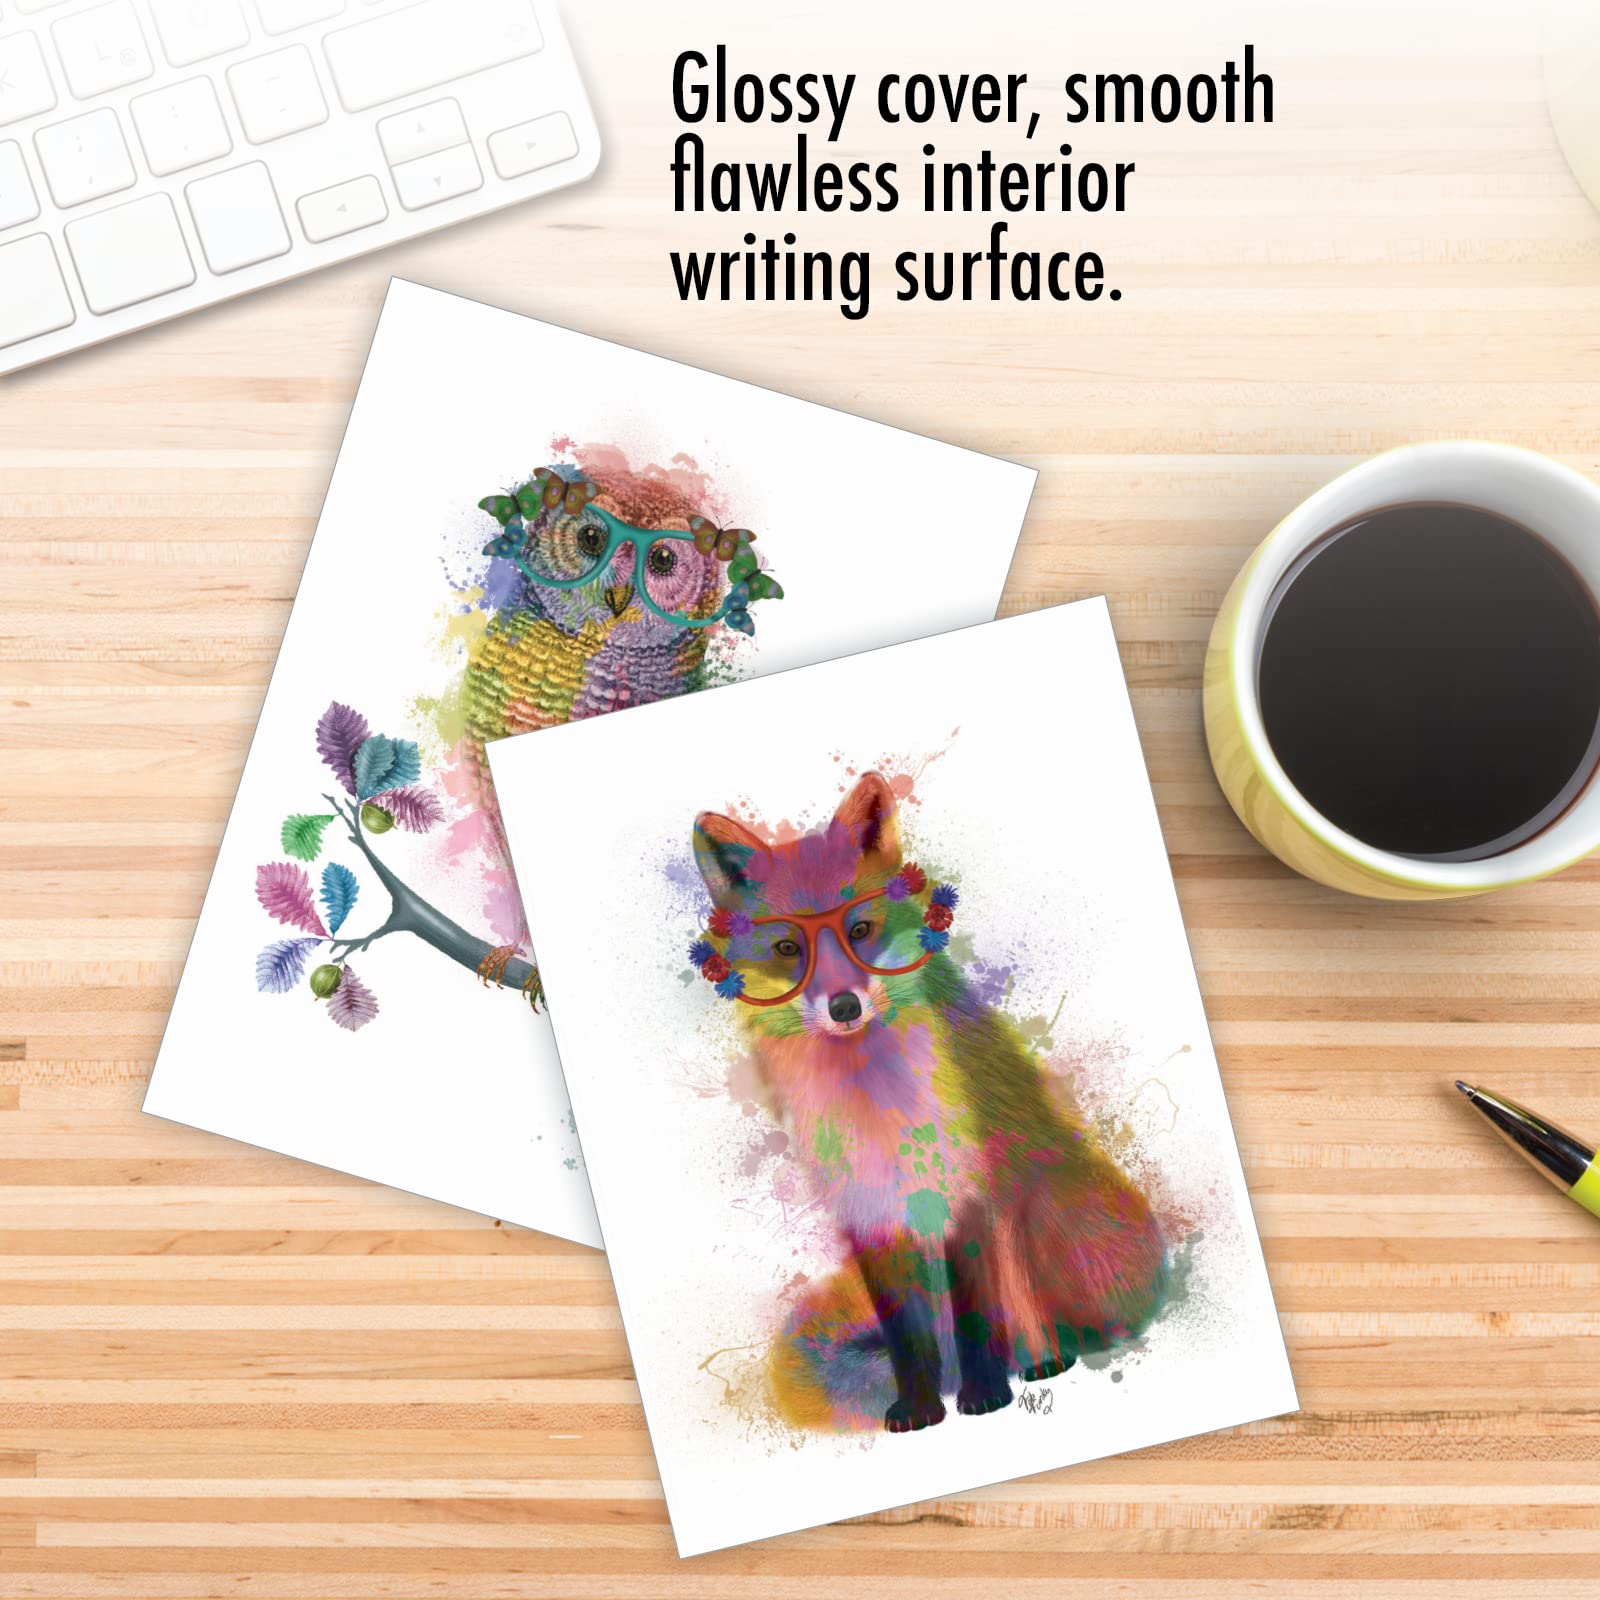 The Best Card Company Assorted Watercolor Blank Greeting Card Box Set - Incl. 10 Notecards + Envelopes, 10 Animal Designs for Thank You, Invitations, More - Funky Rainbow Wildlife M4948OCB-B1x10